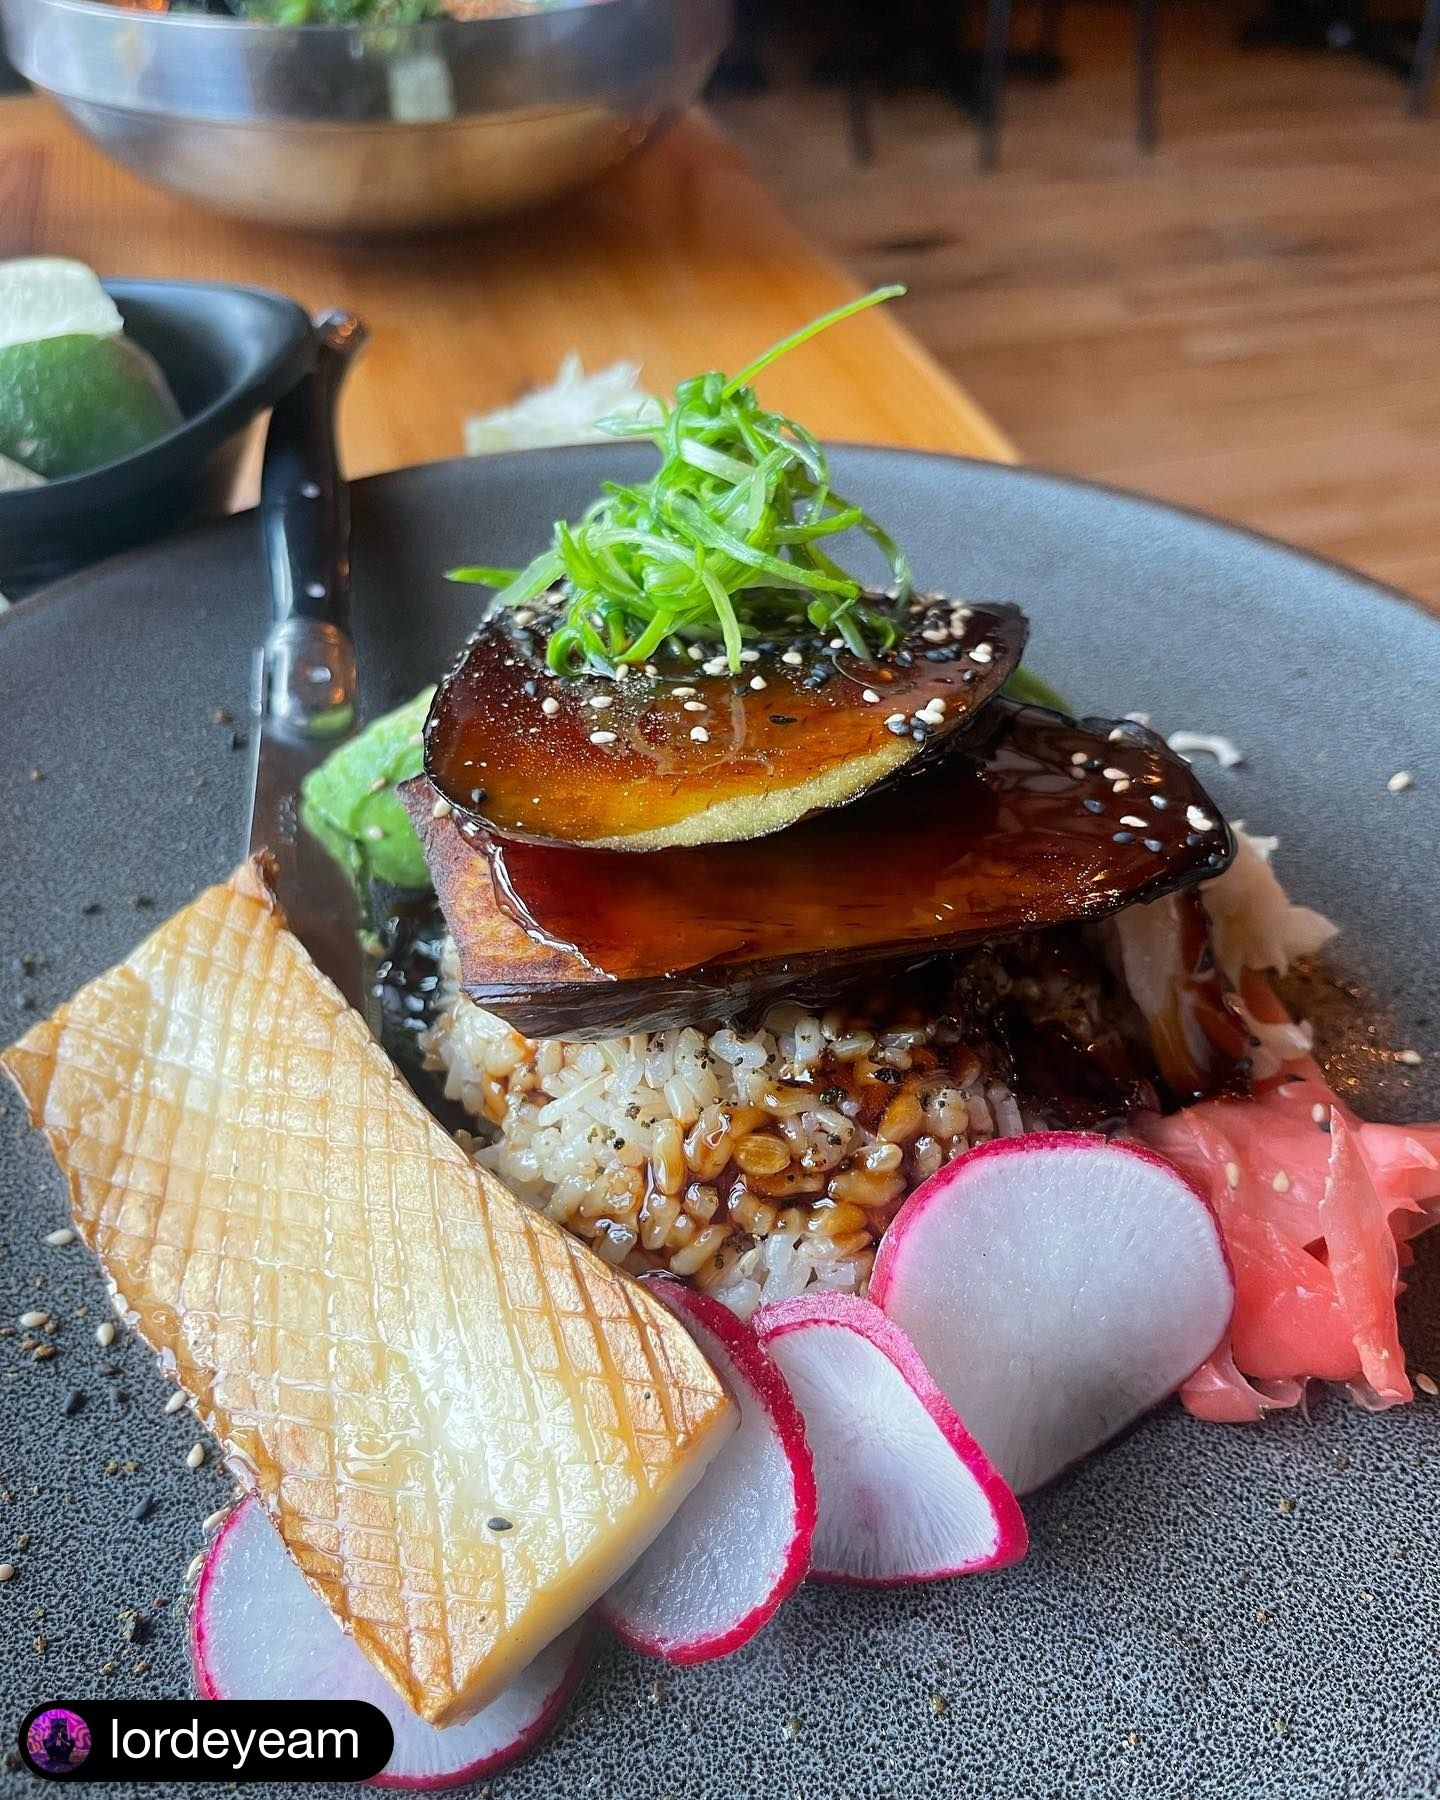 You won't believe THIS is eggplant! 🍆 Grilled &amp; glazed with Japanese BBQ sauce, served with smoked &amp; grilled 🍄 king trumpet mushroom, 🥑 avocado and house-made white kimchi on a bed of steamed rice &ndash; this #vegan dish will melt in your